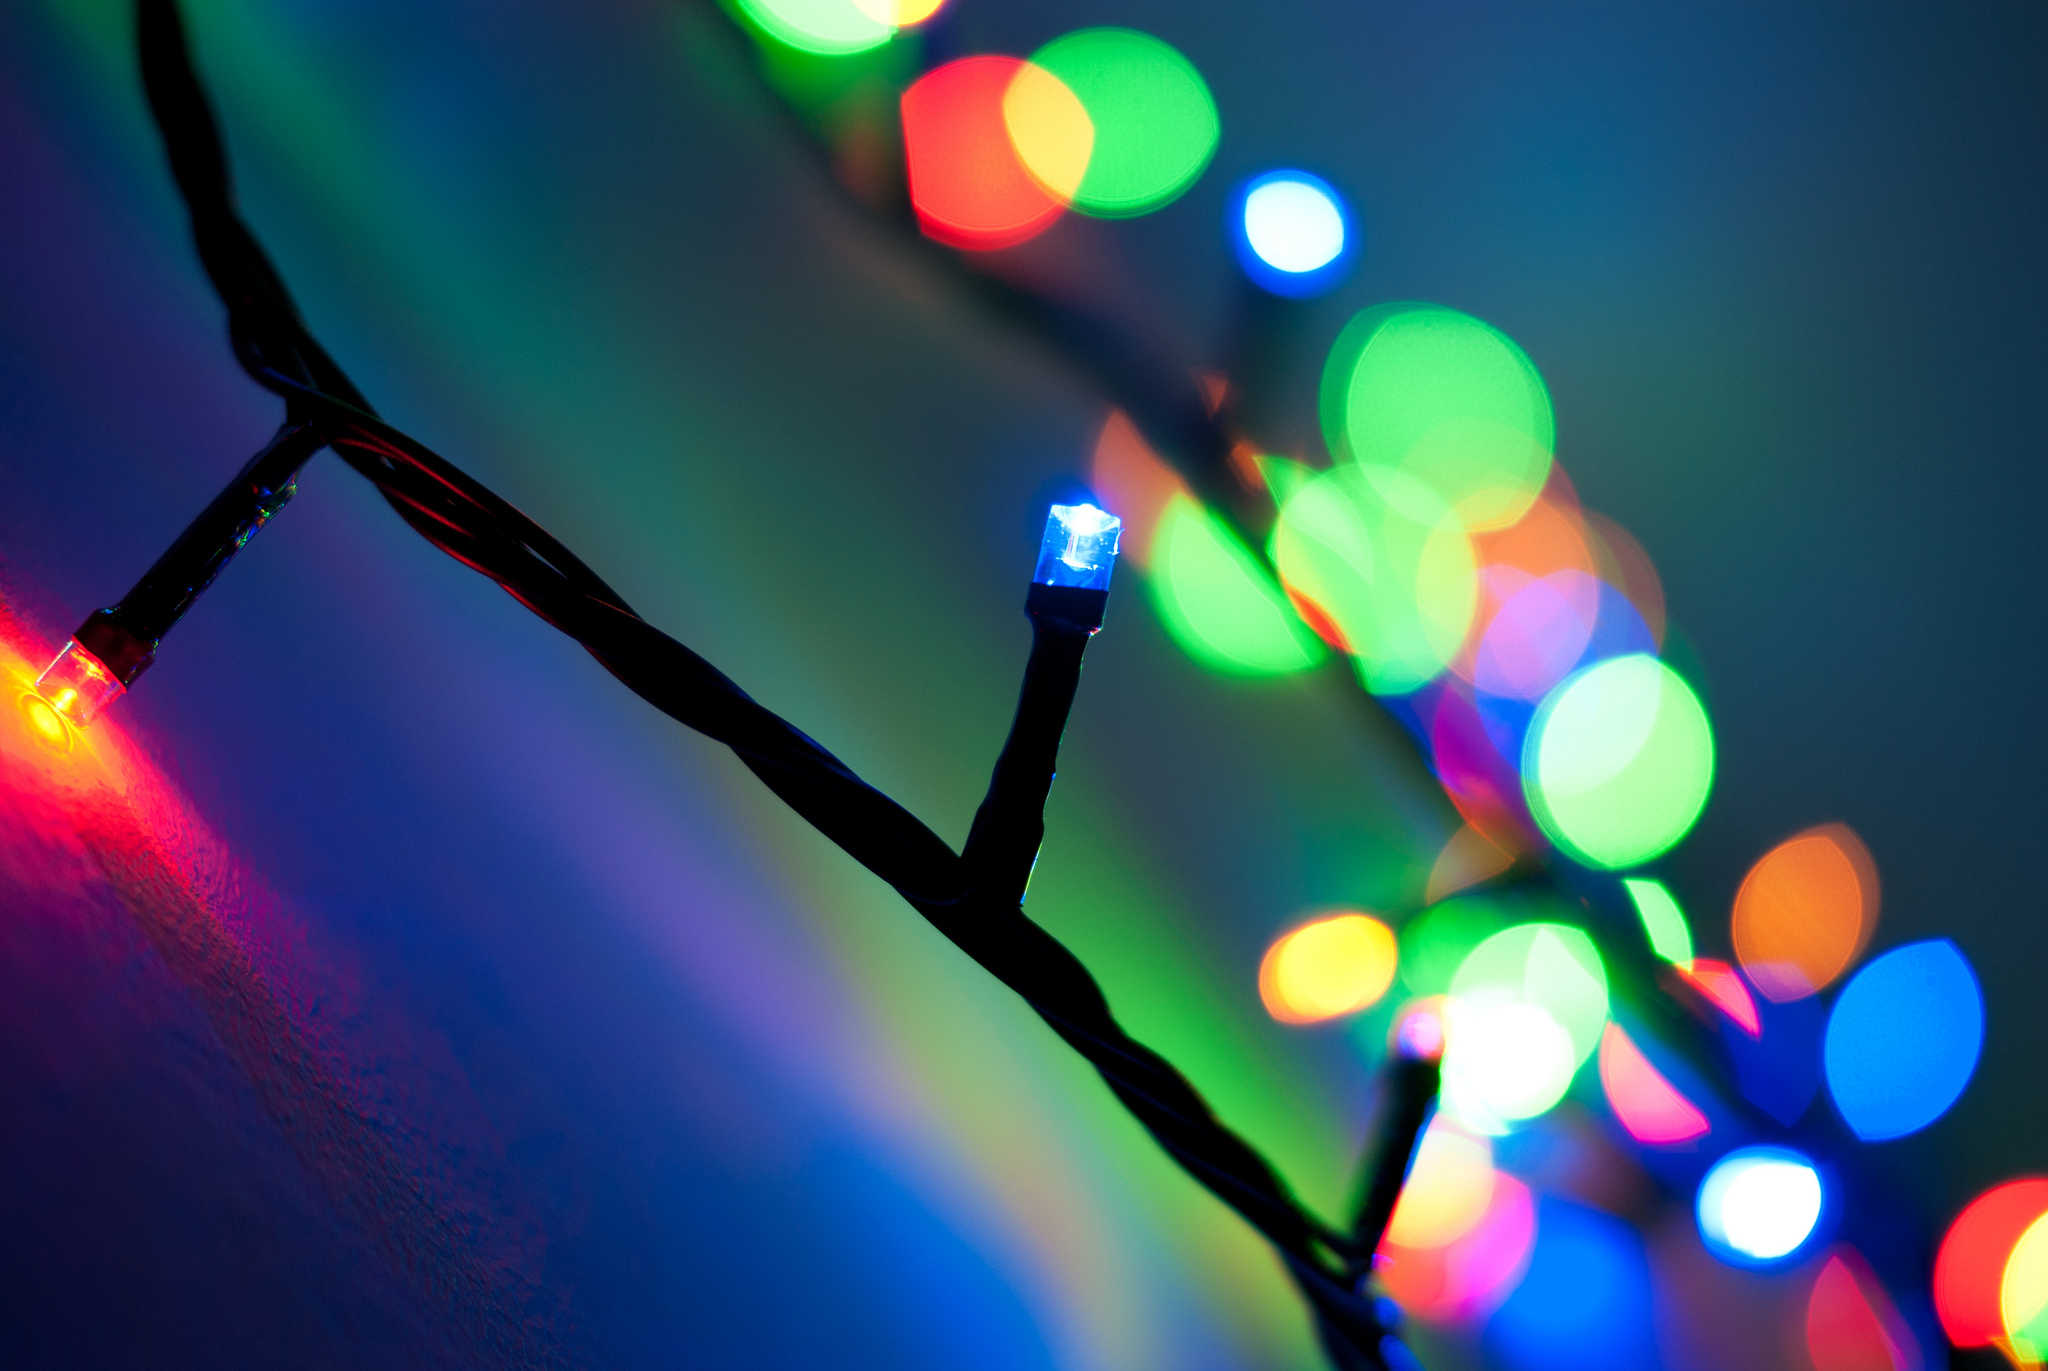 Blinking Christmas lights might be messing with your Wi-Fi.